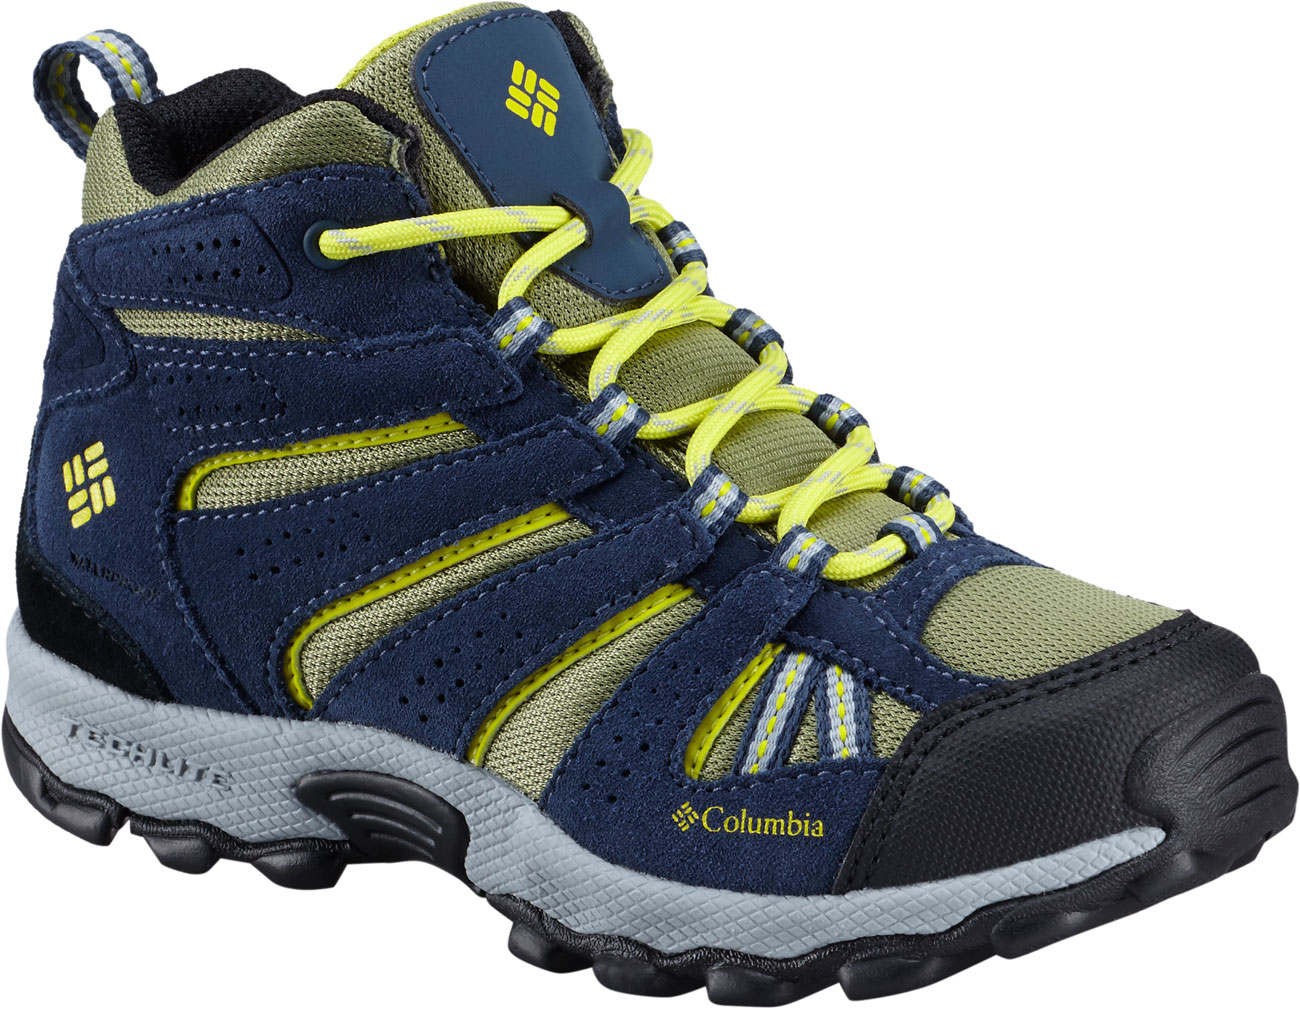 Kids’ outdoor shoes